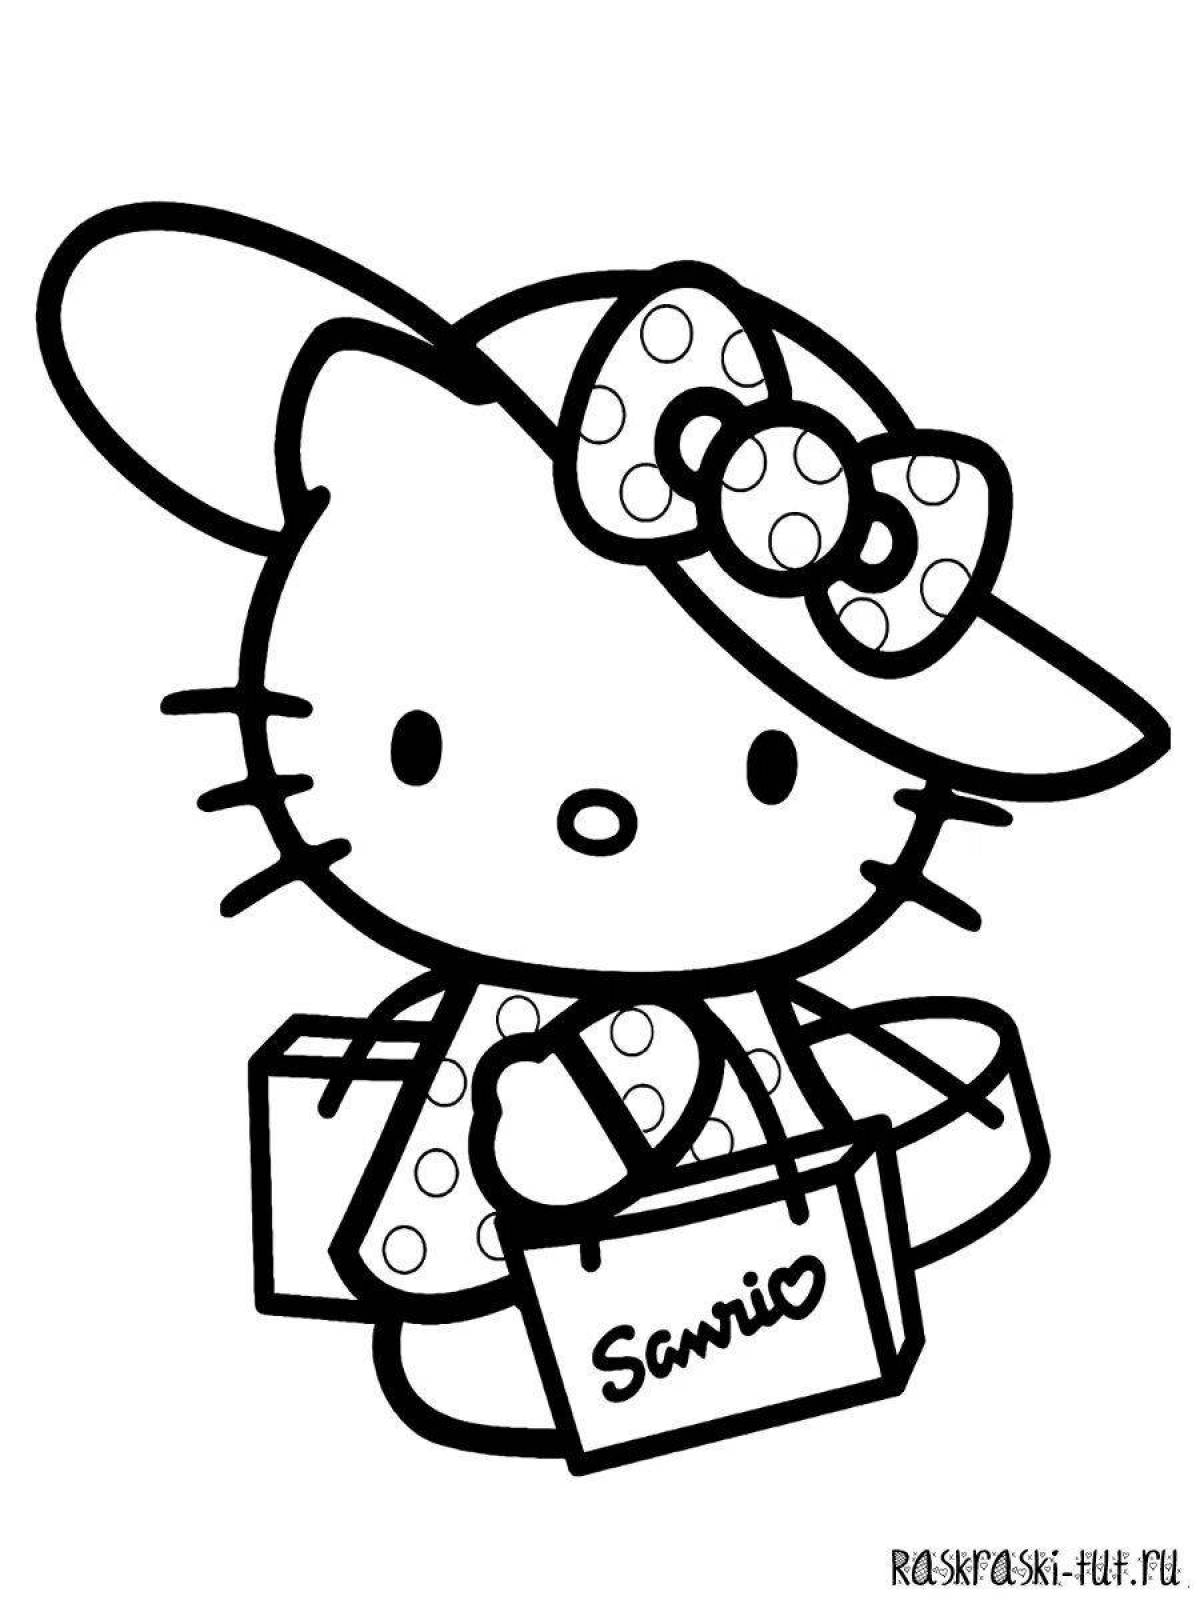 Milady Hello Kitty's mesmerizing coloring book